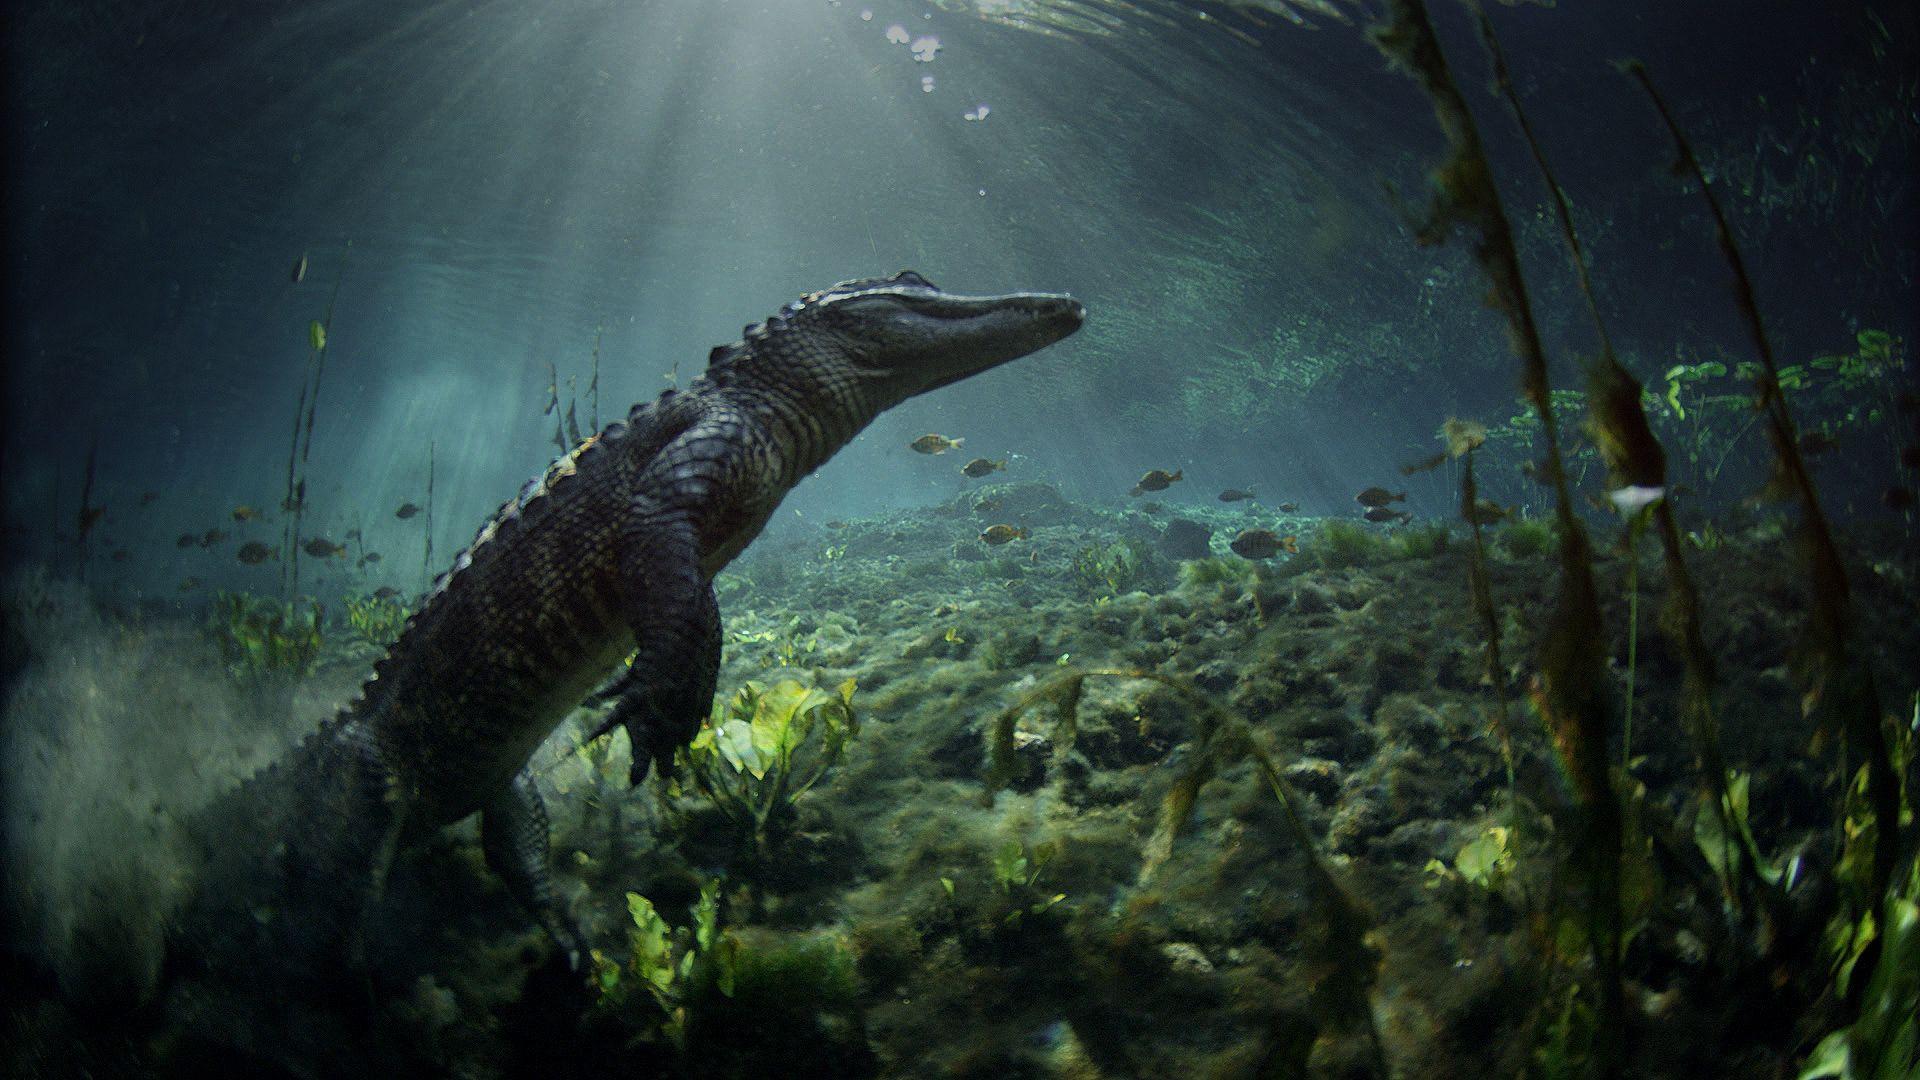 Meet the Residents of Everglades National Park